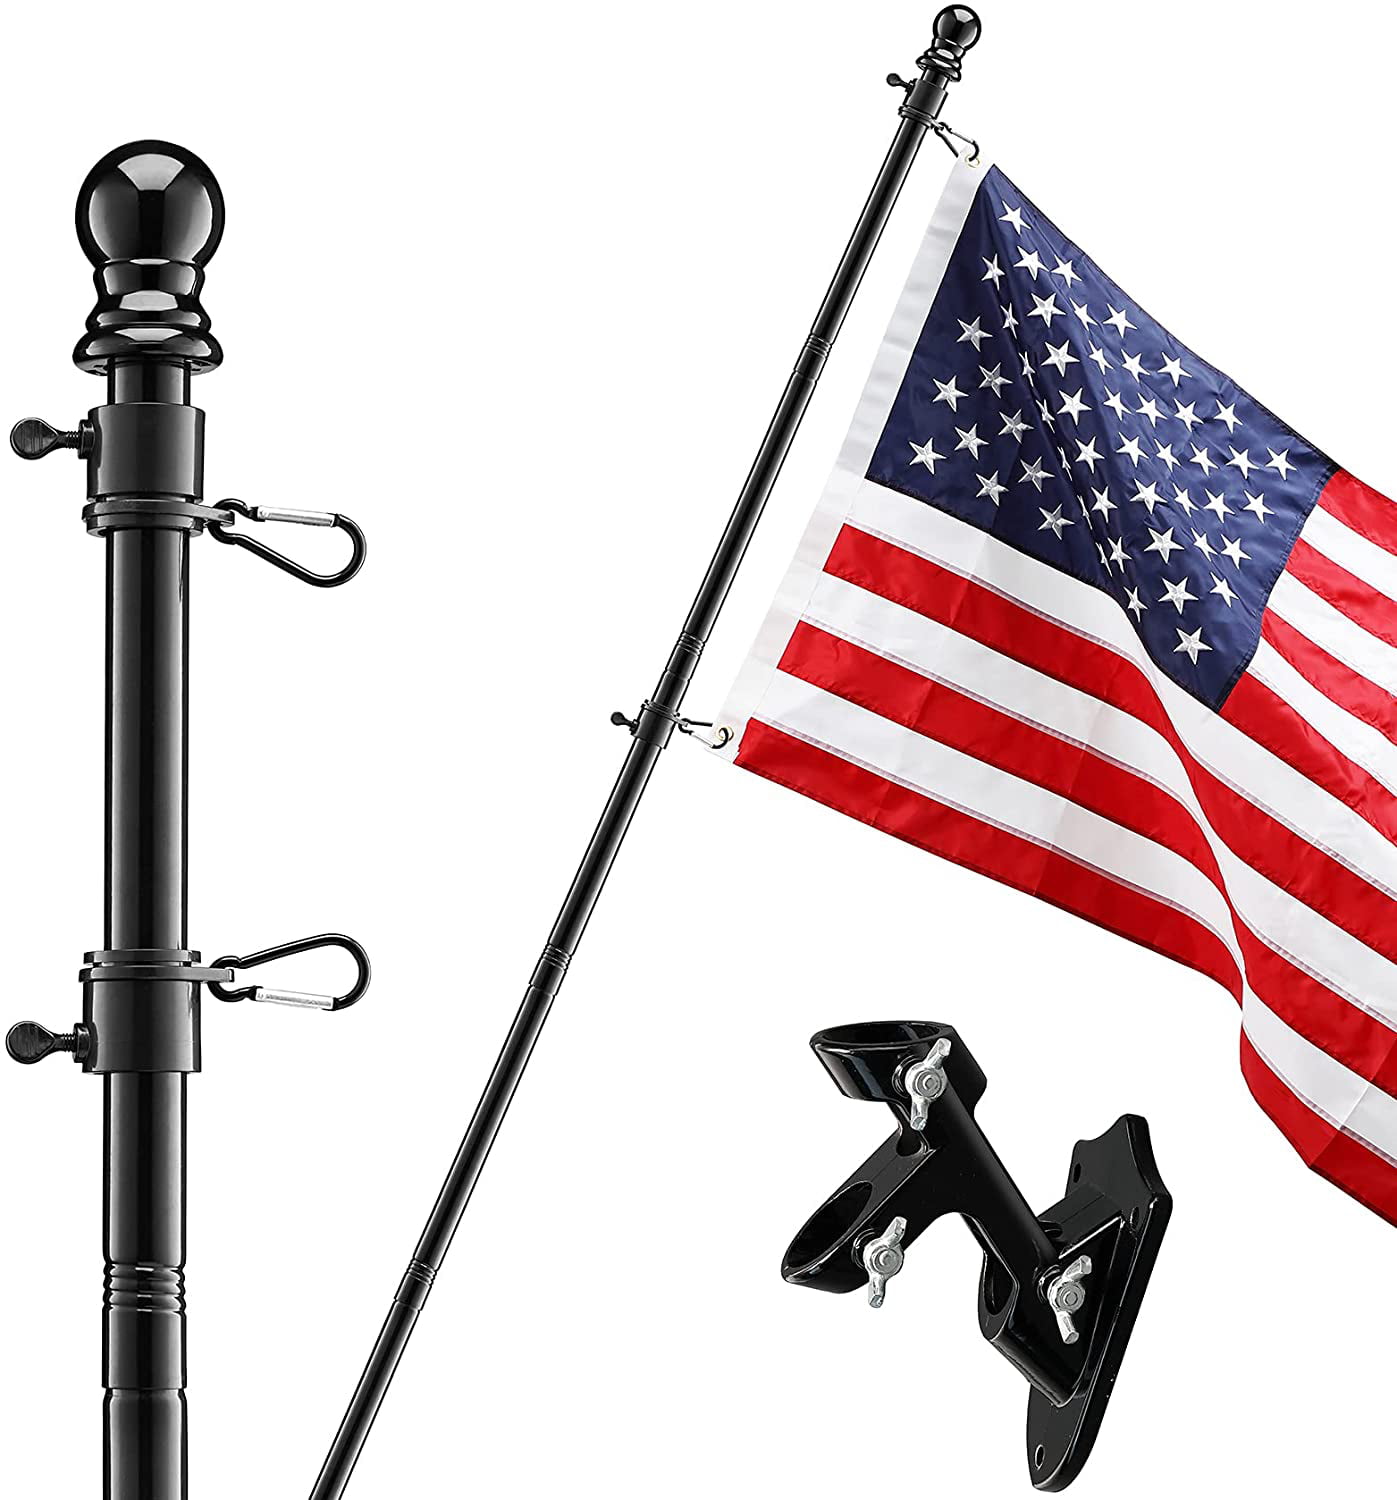 SANDEGOO 5 FT Flag Pole Kit，Stainless Steel Heavy Garden Flagpole Home or Commercial Outdoor Wall Mounted Flagpole 5 FT, Black 